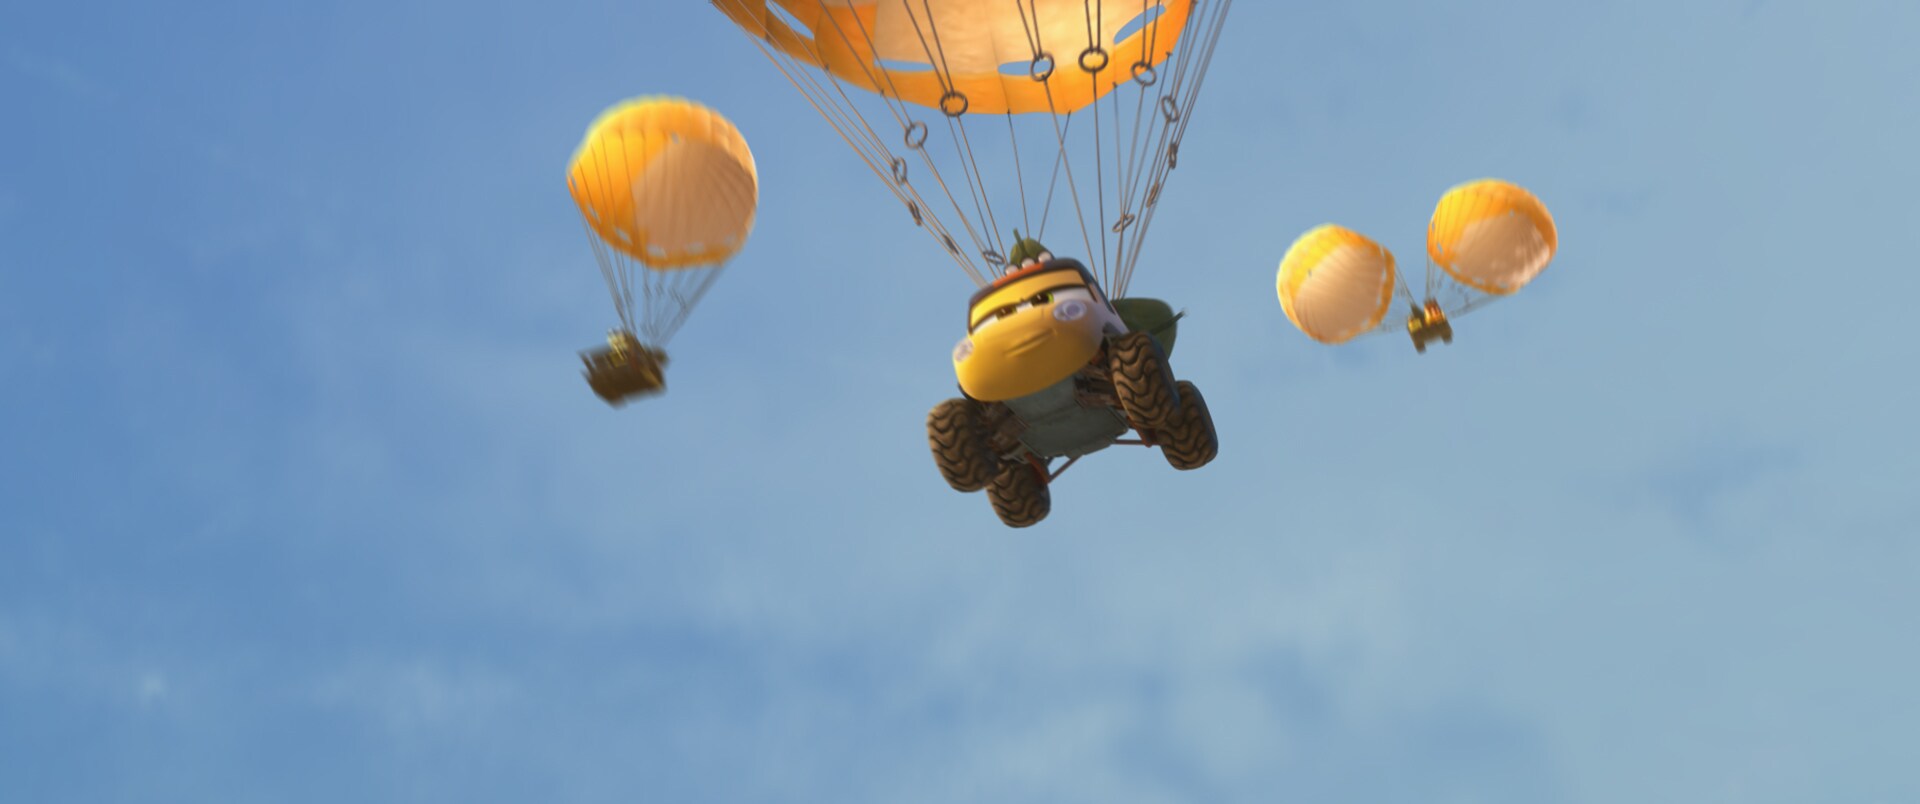 The Smokejumpers a fearless team of grounded firefighters from the movie "Planes: Fire & Rescue"